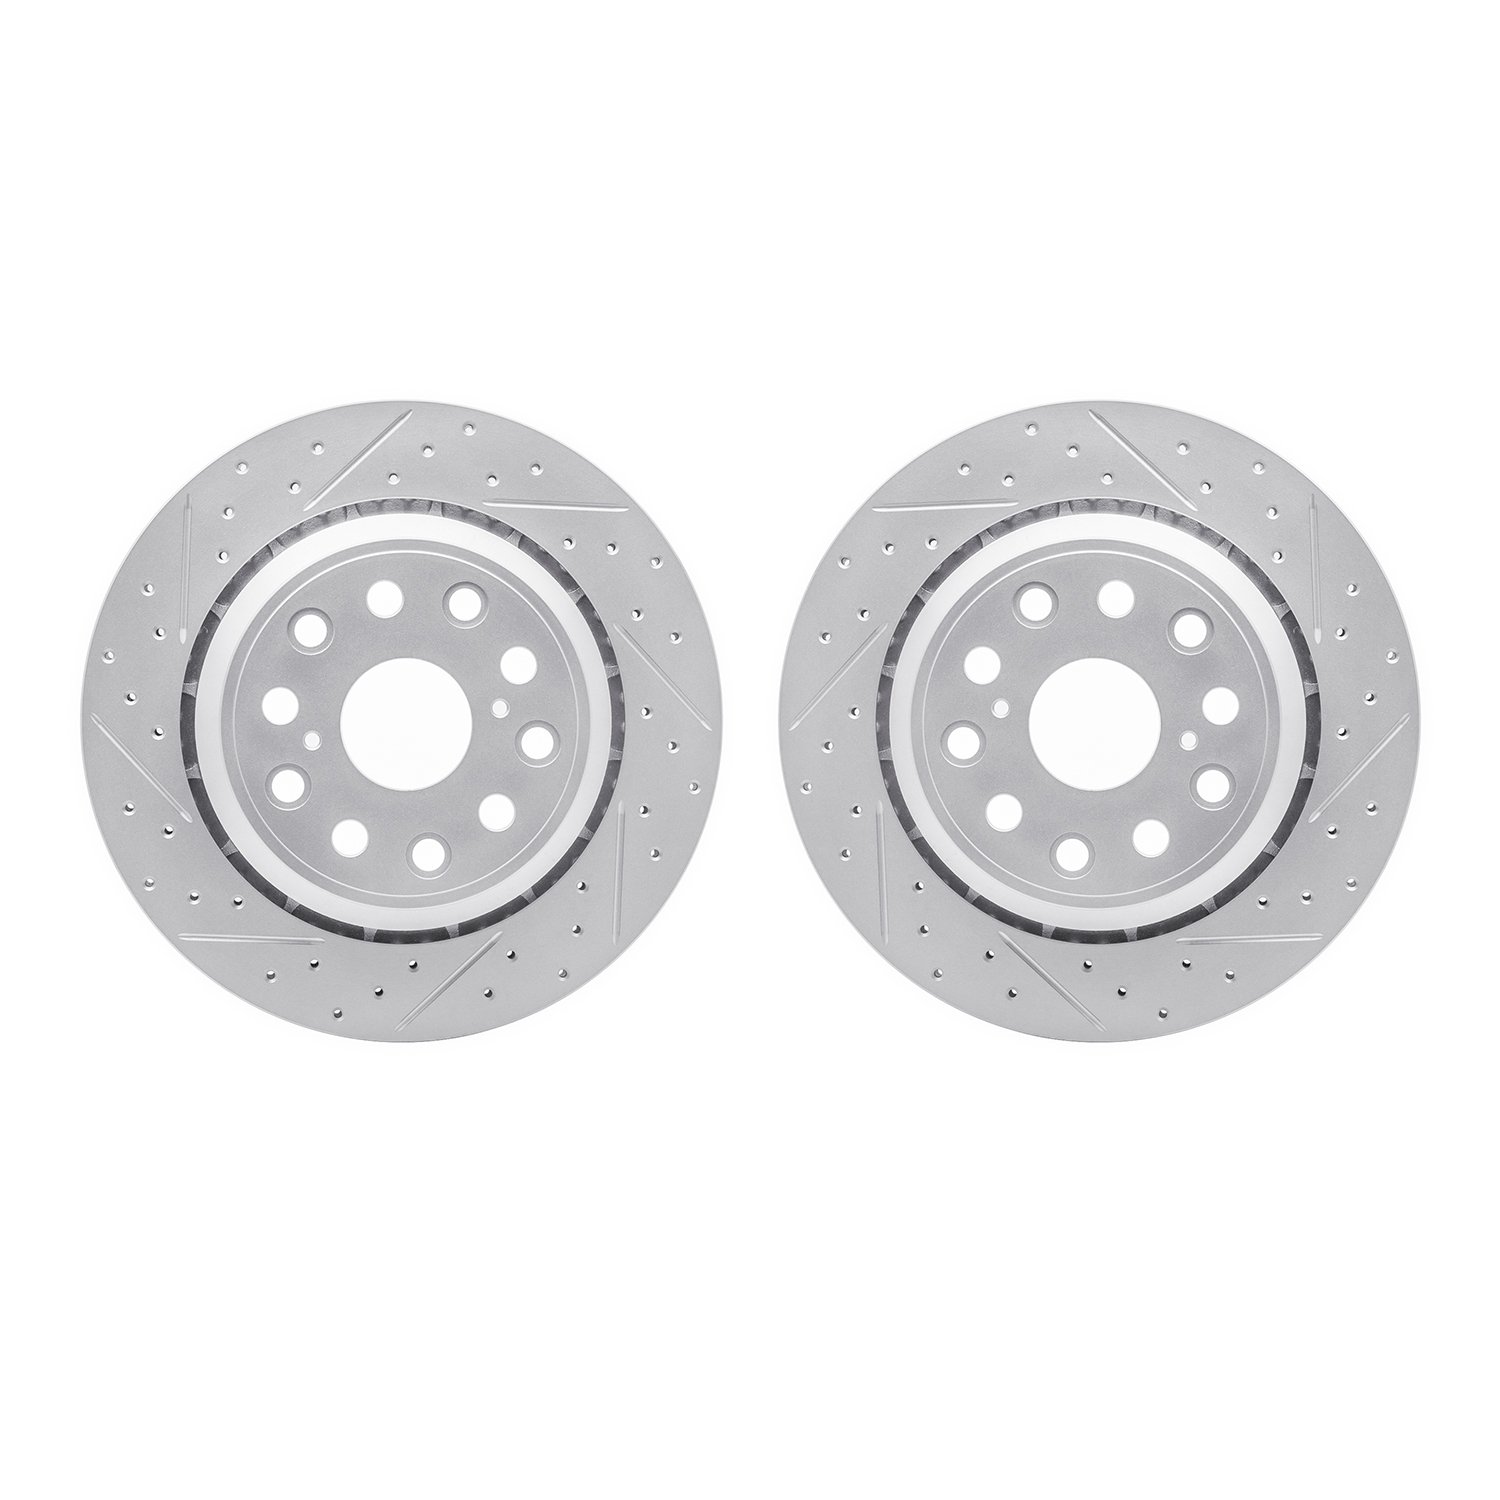 2002-75025 Geoperformance Drilled/Slotted Brake Rotors, 2007-2017 Lexus/Toyota/Scion, Position: Rear